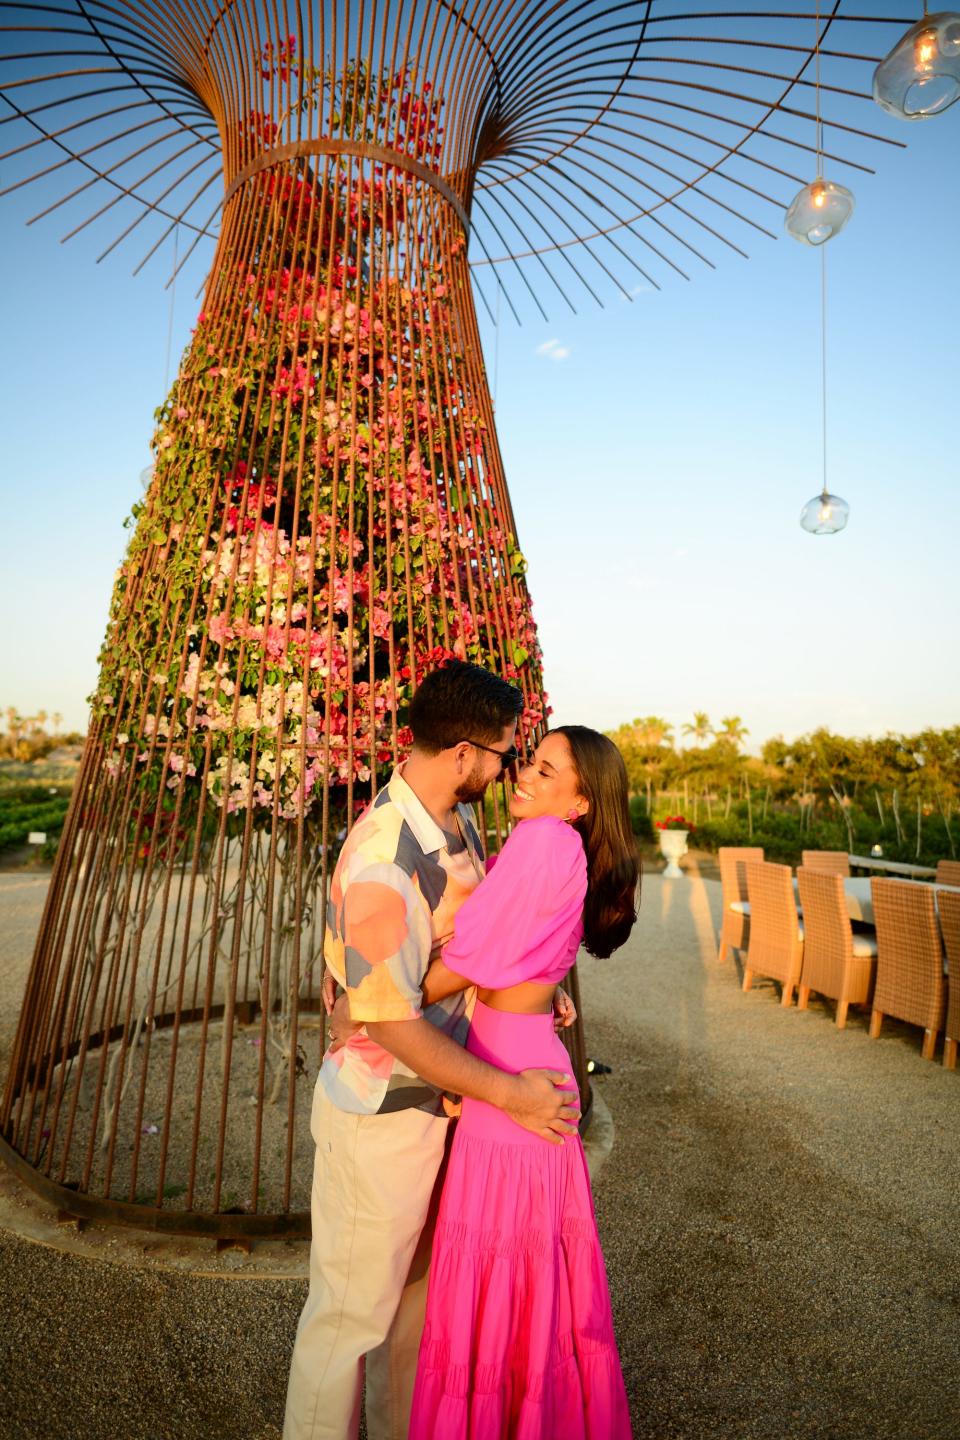 A man and woman embrace in front of a floral sculpture.